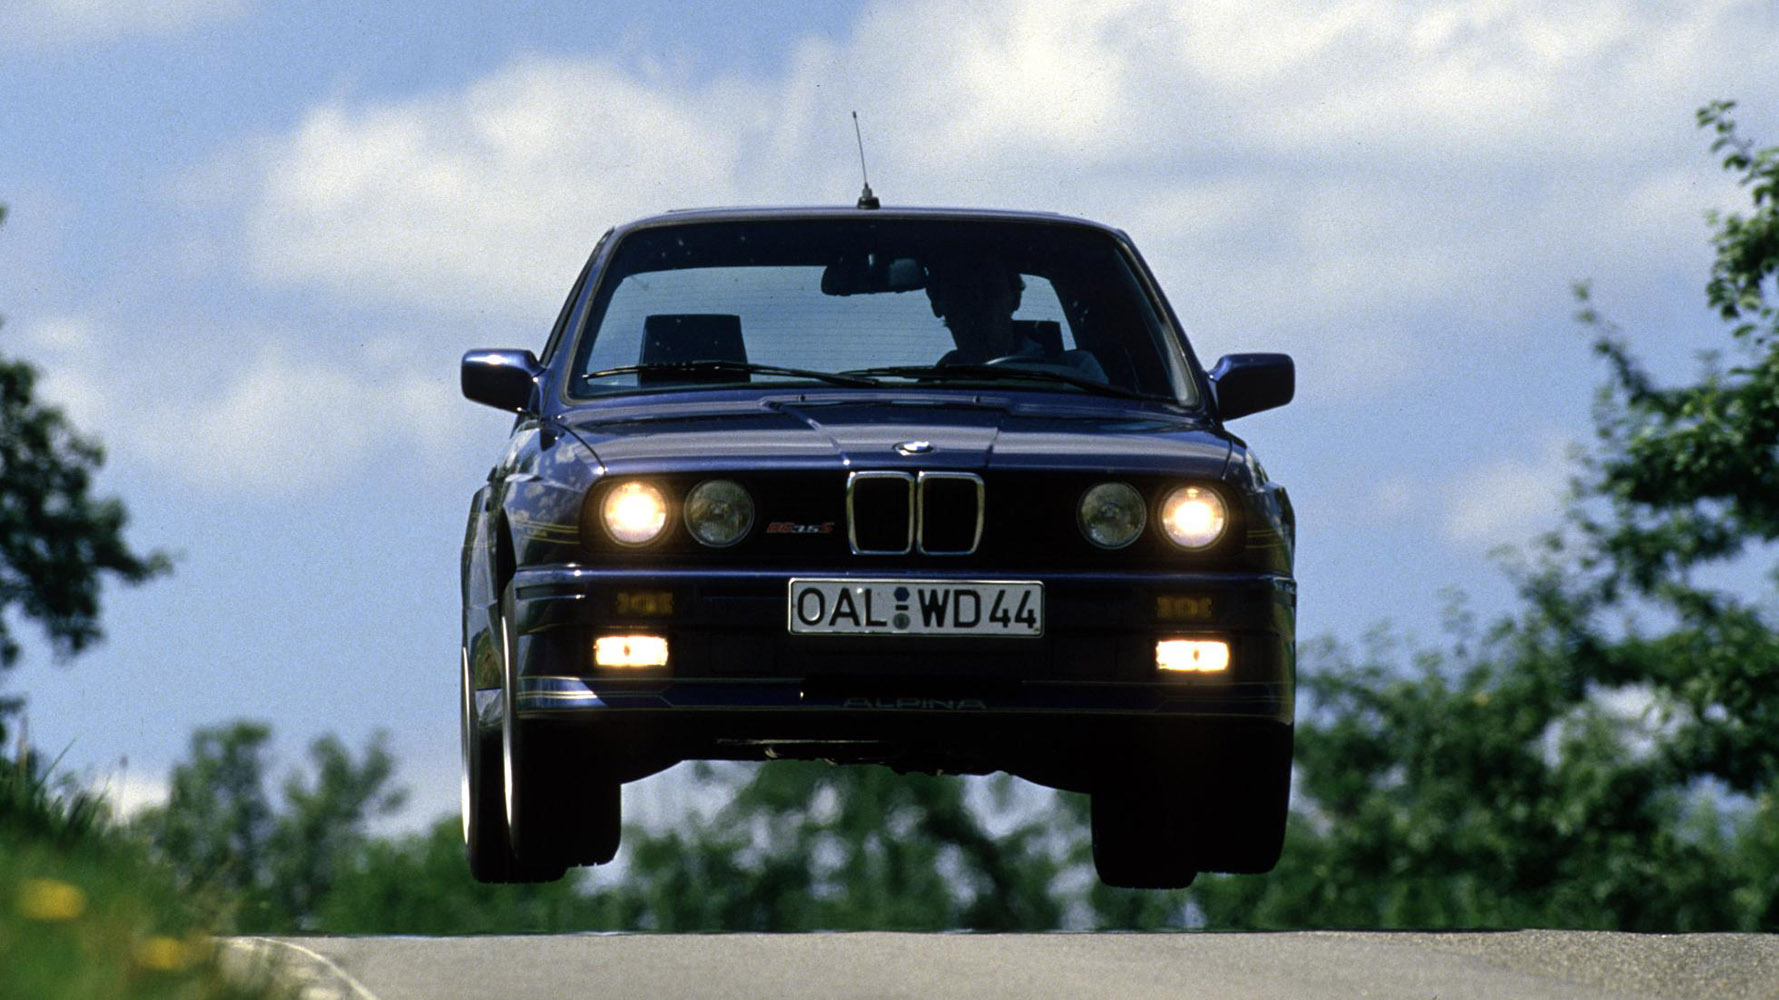 And Alpina tuned and tunes absolutely everything, from E21 320s with just 121bhp and 130b ft in the mid-‘70s, to M3-alike B6 2.8s - based on the E21 323i - with 215bhp (in 1981, that was plenty), and latterly BMW’s powerful turbo-diesels. It has tuned and fettled pretty much every BMW model since, adding power and performance, but always managing to stay relatively subtle, and very, very drivable - this is a rounded company that doesn’t just chase headline horsepower. Of course, the signature 20-spoke alloy